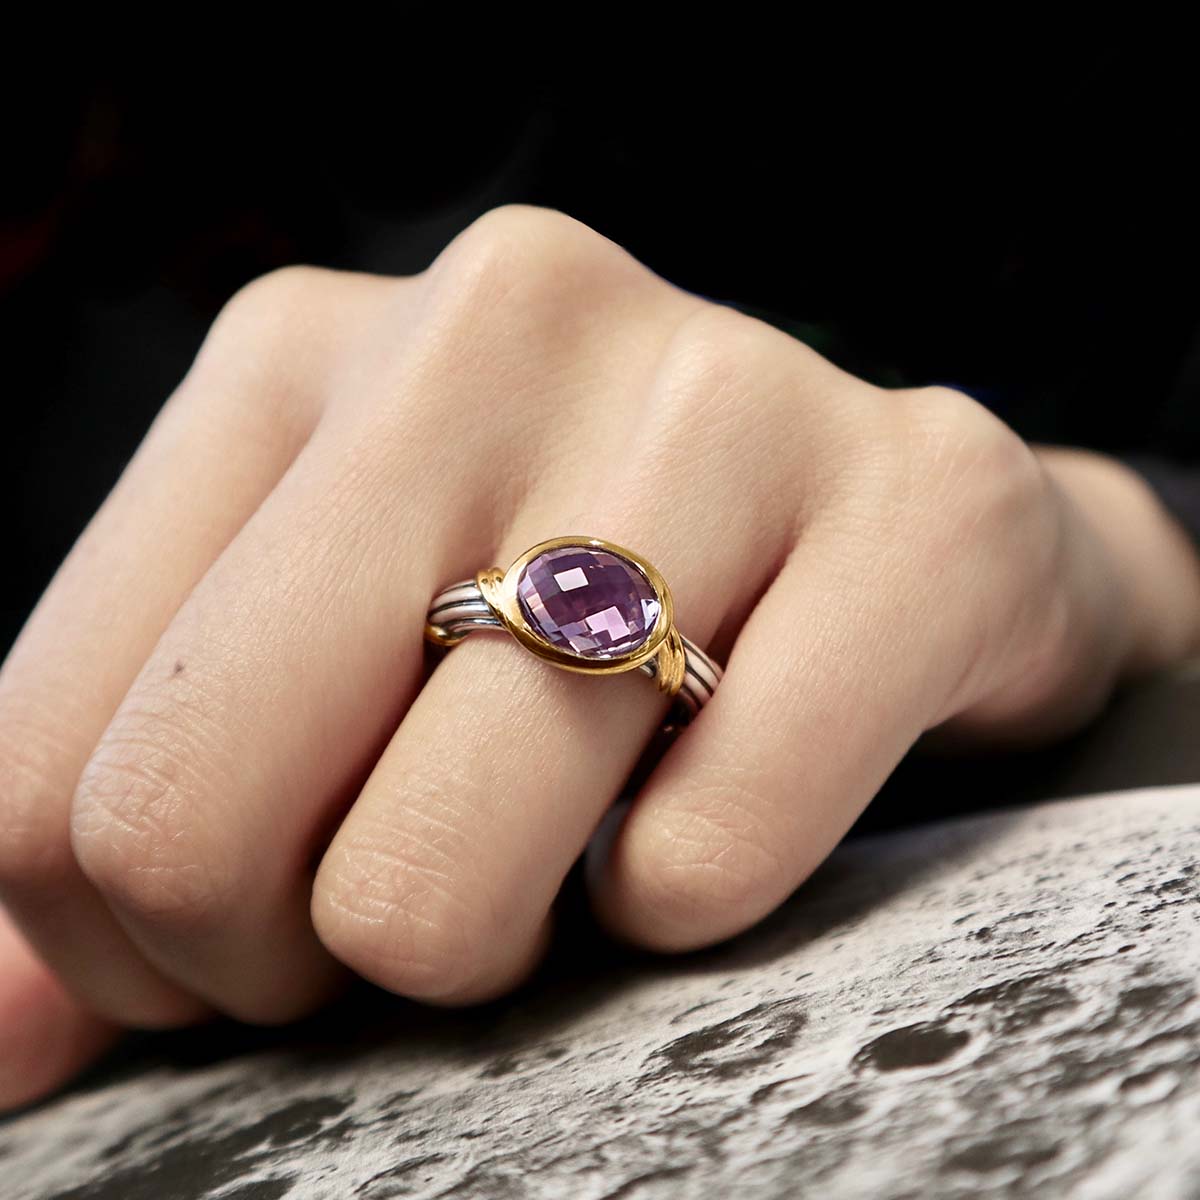 Buy RAW AMETHYST RING Rough Natural Gem Ring Purple Crystal Ring Ring With  Purple Stone Ring With Amethyst Birthstone Ring February Online in India -  Etsy